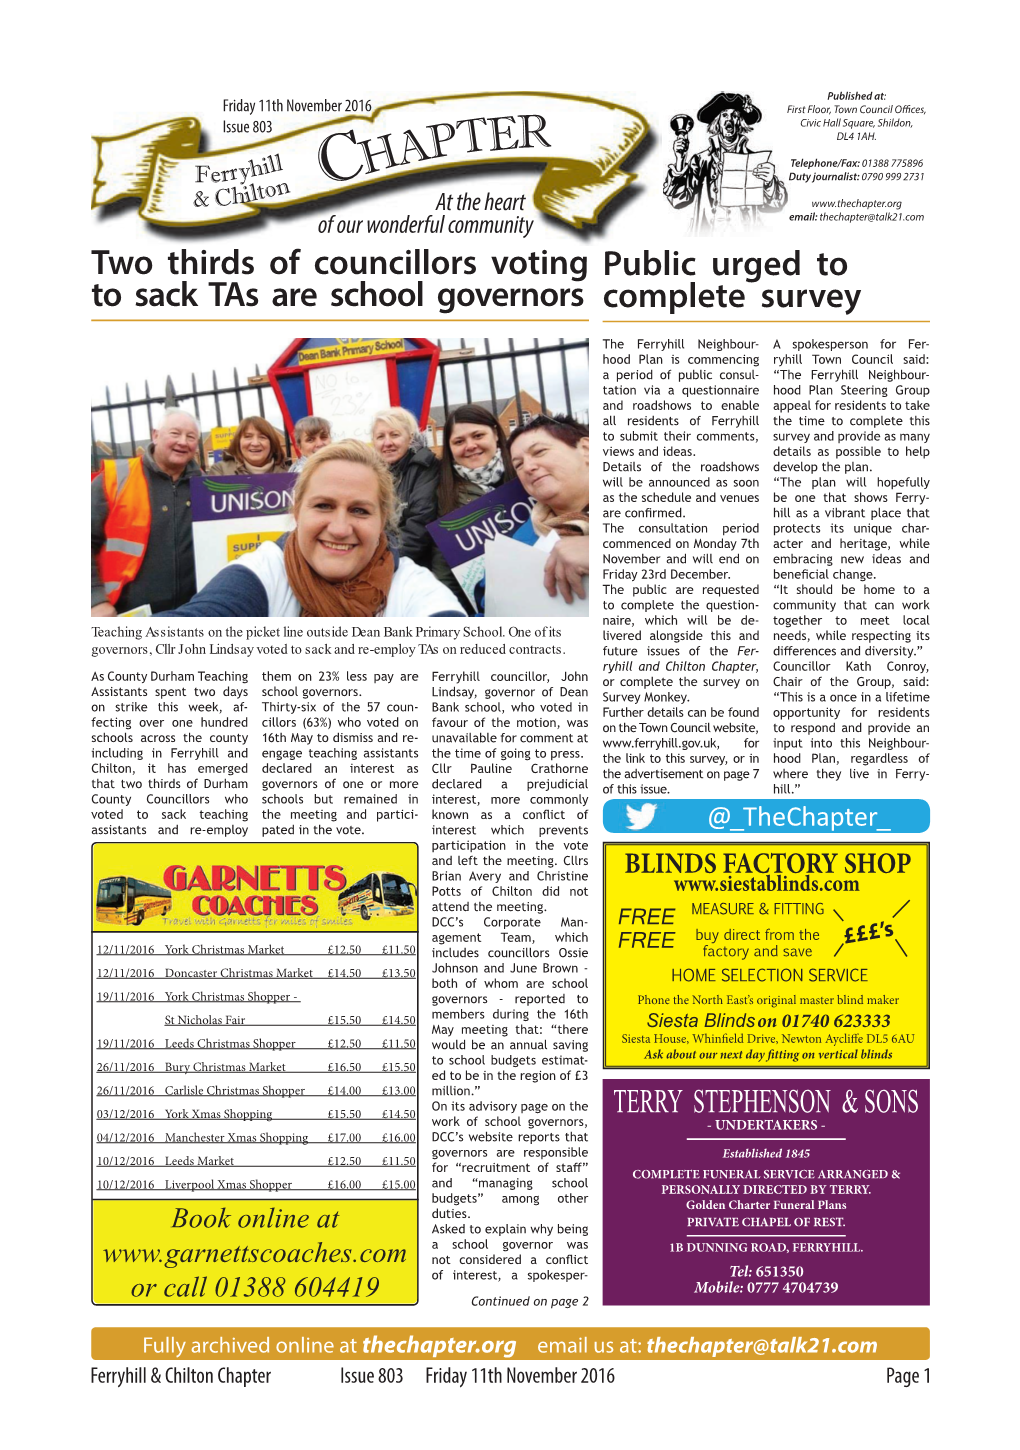 Chapter.Org of Our Wonderful Community Email: Thechapter@Talk21.Com Two Thirds of Councillors Voting Public Urged to to Sack Tas Are School Governors Complete Survey